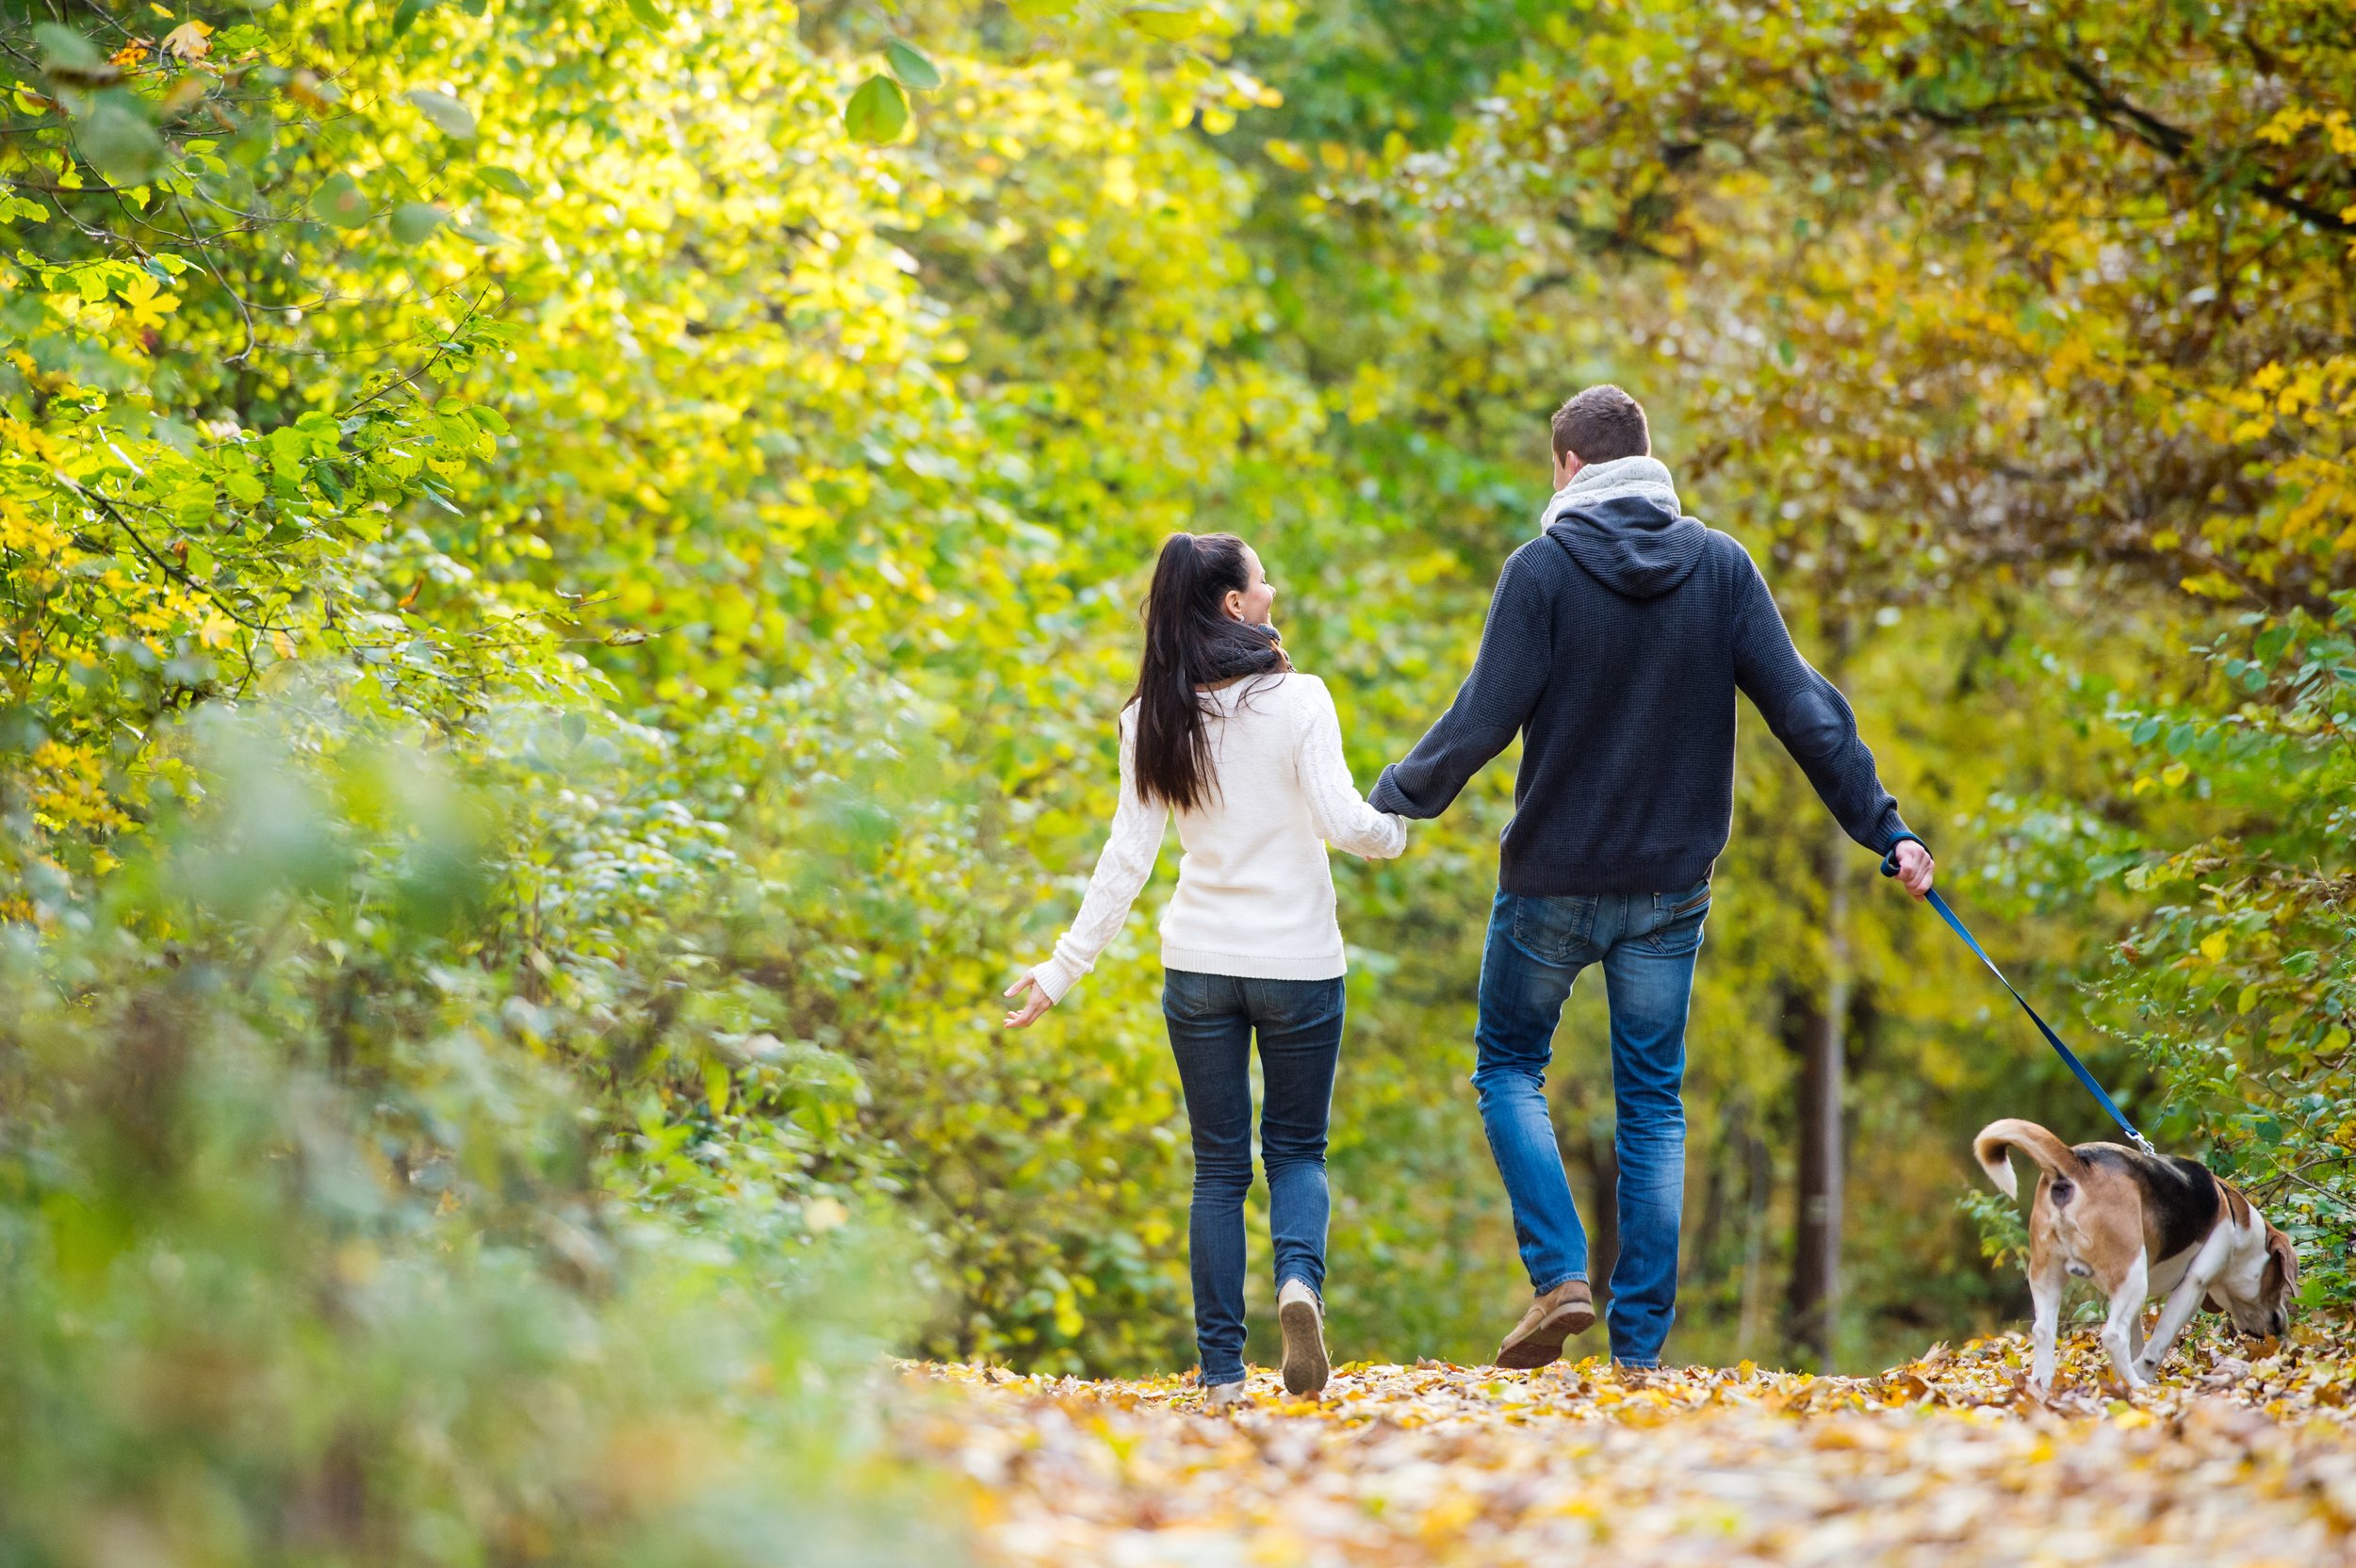 beautiful-young-couple-with-dog-on-a-walk-in-colorful-sunny-autumn-forest-rear-view-SBI-305223038.jpg